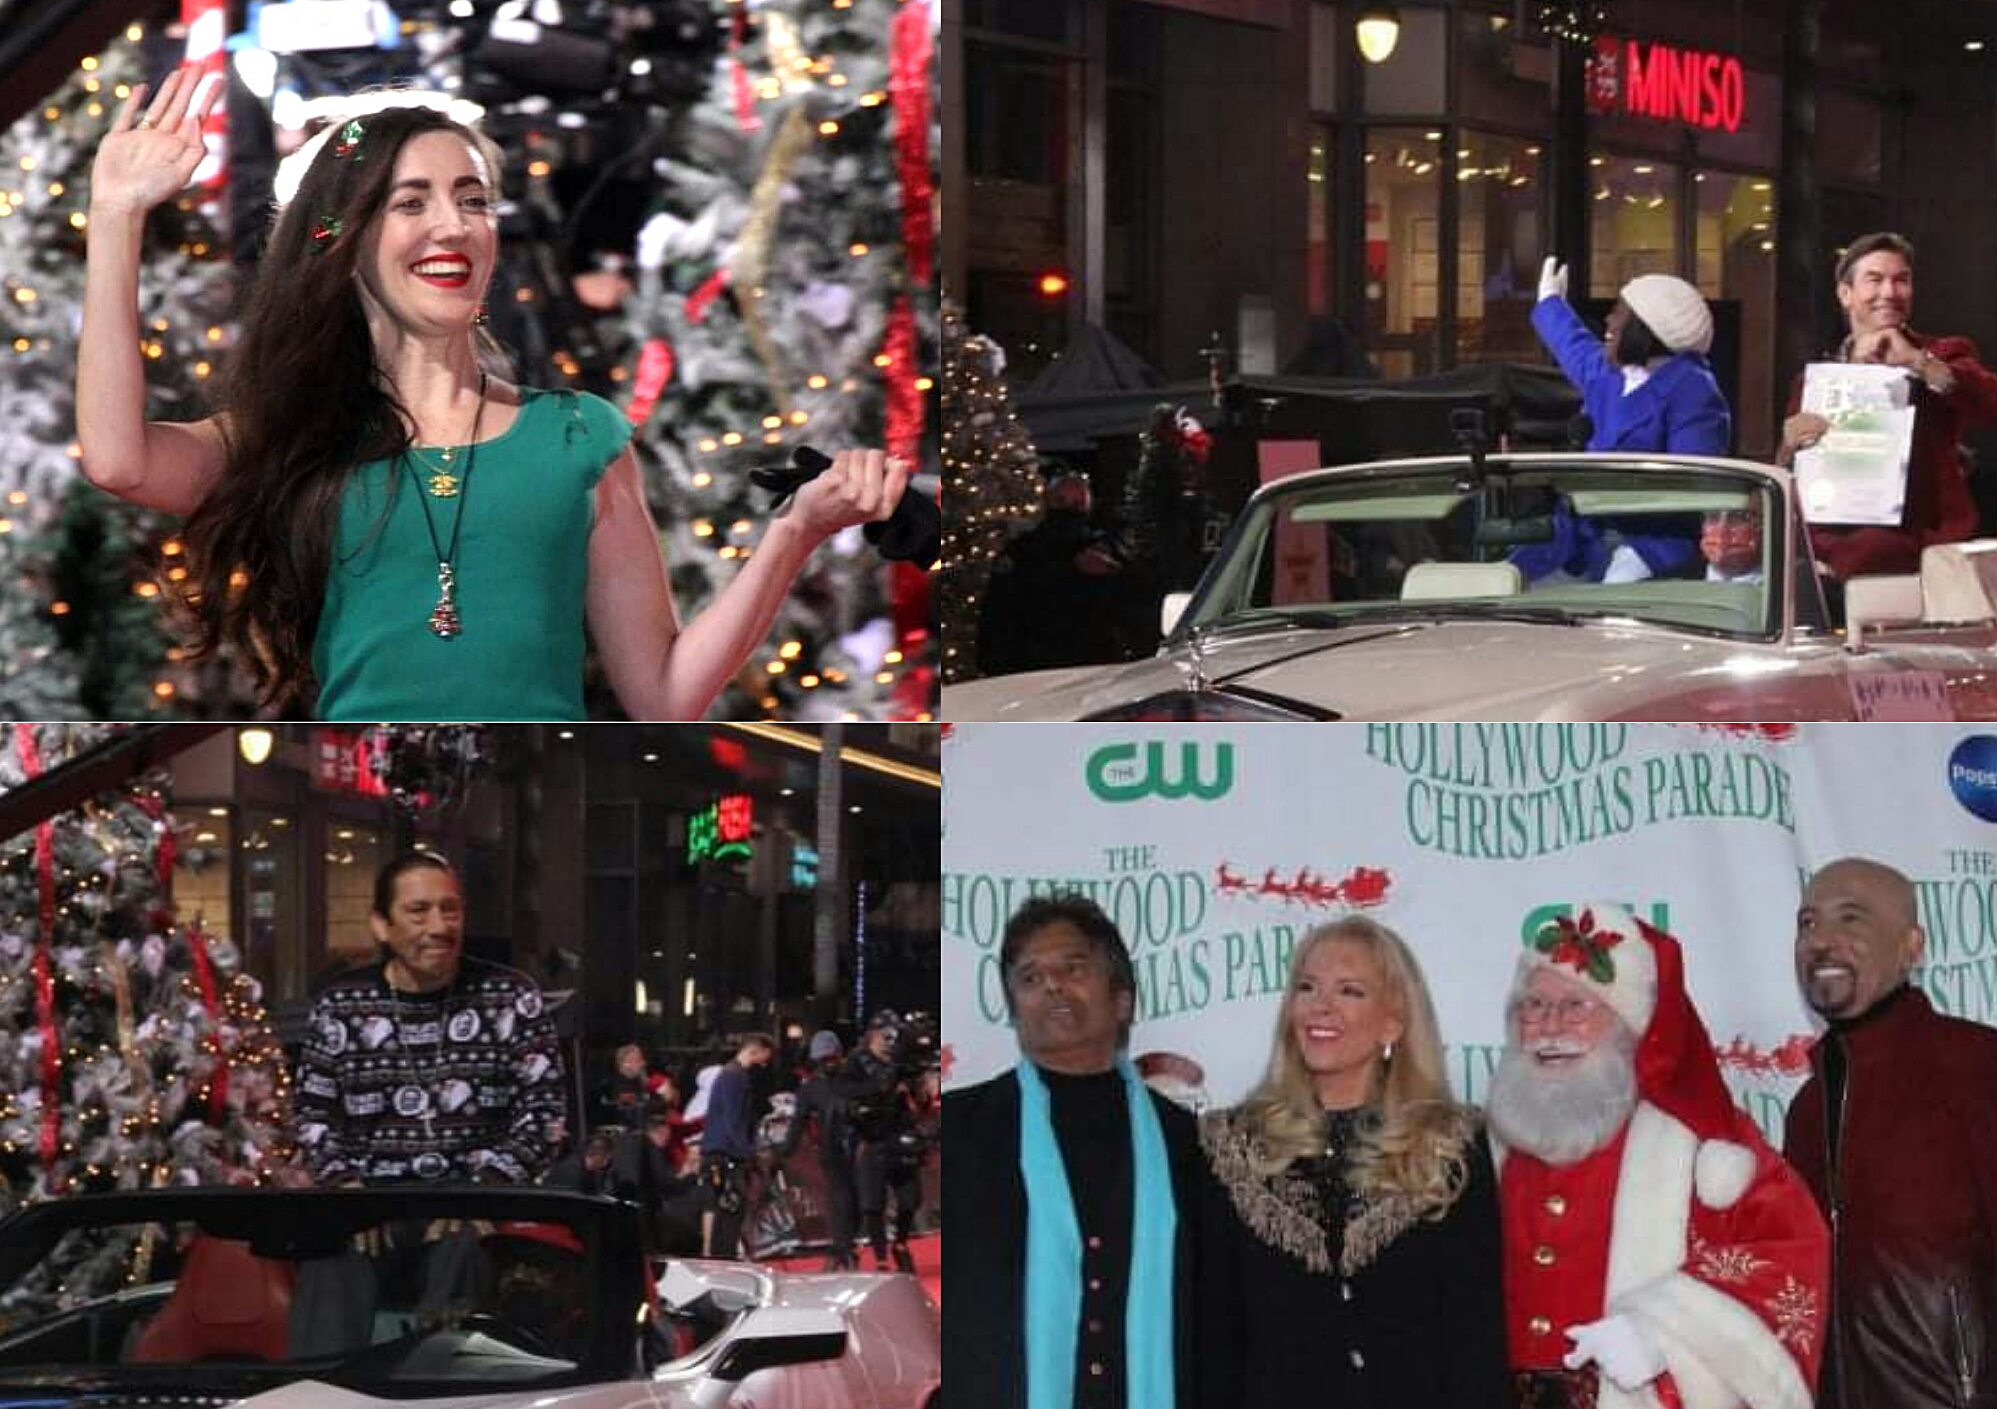 89th Hollywood Christmas Parade: Jerry O'Connell, Amber Martinez, Danny Trejo, Sheryl Underwood, Kate Linder, and More 